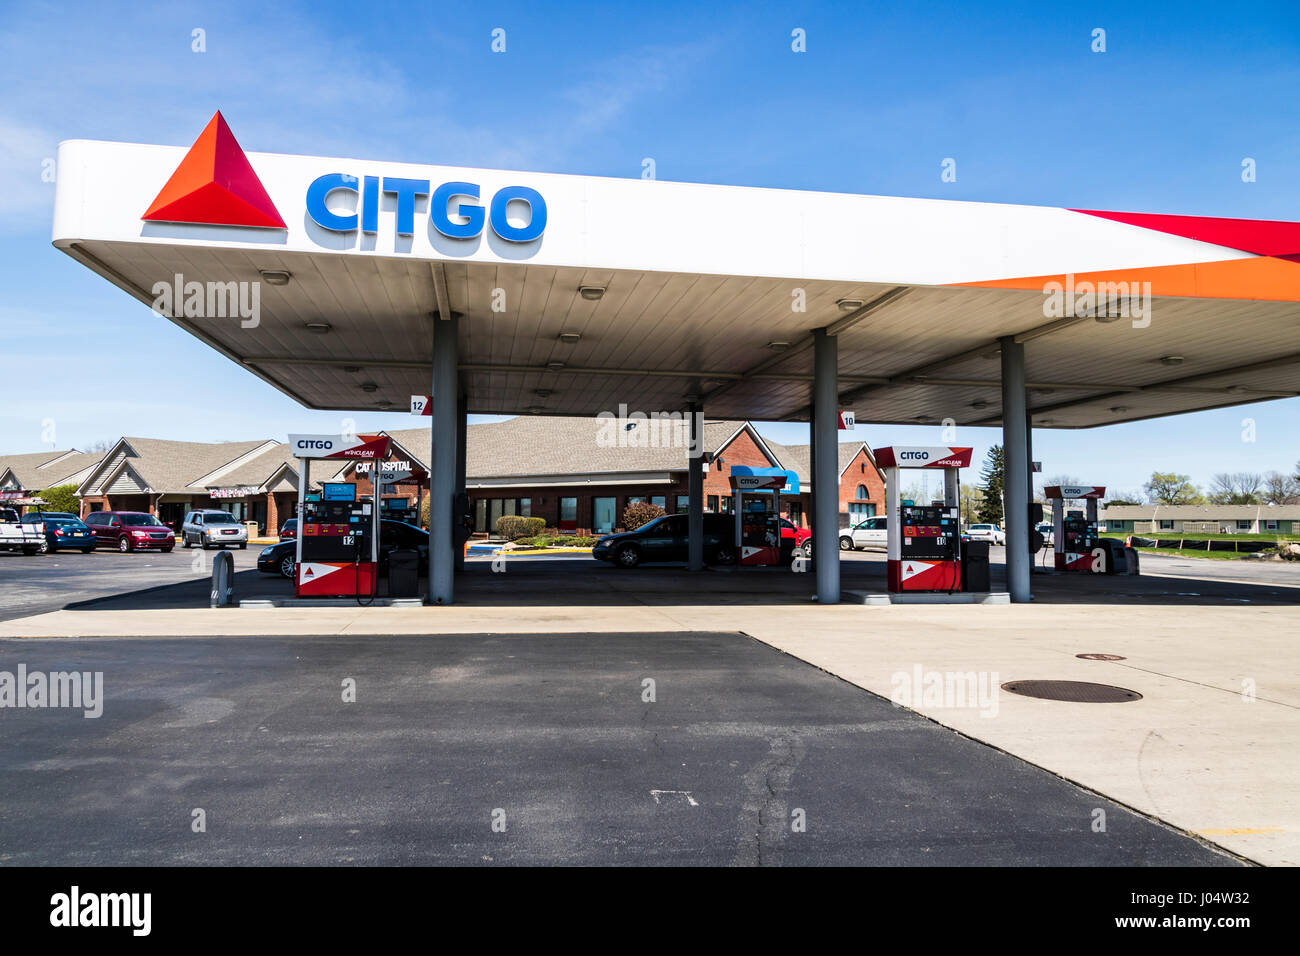 Lafayette - Circa April 2017: Citgo Retail Gas and Petrol Station. Citgo is a refiner, transporter and marketer of gas and petrochemicals II Stock Photo